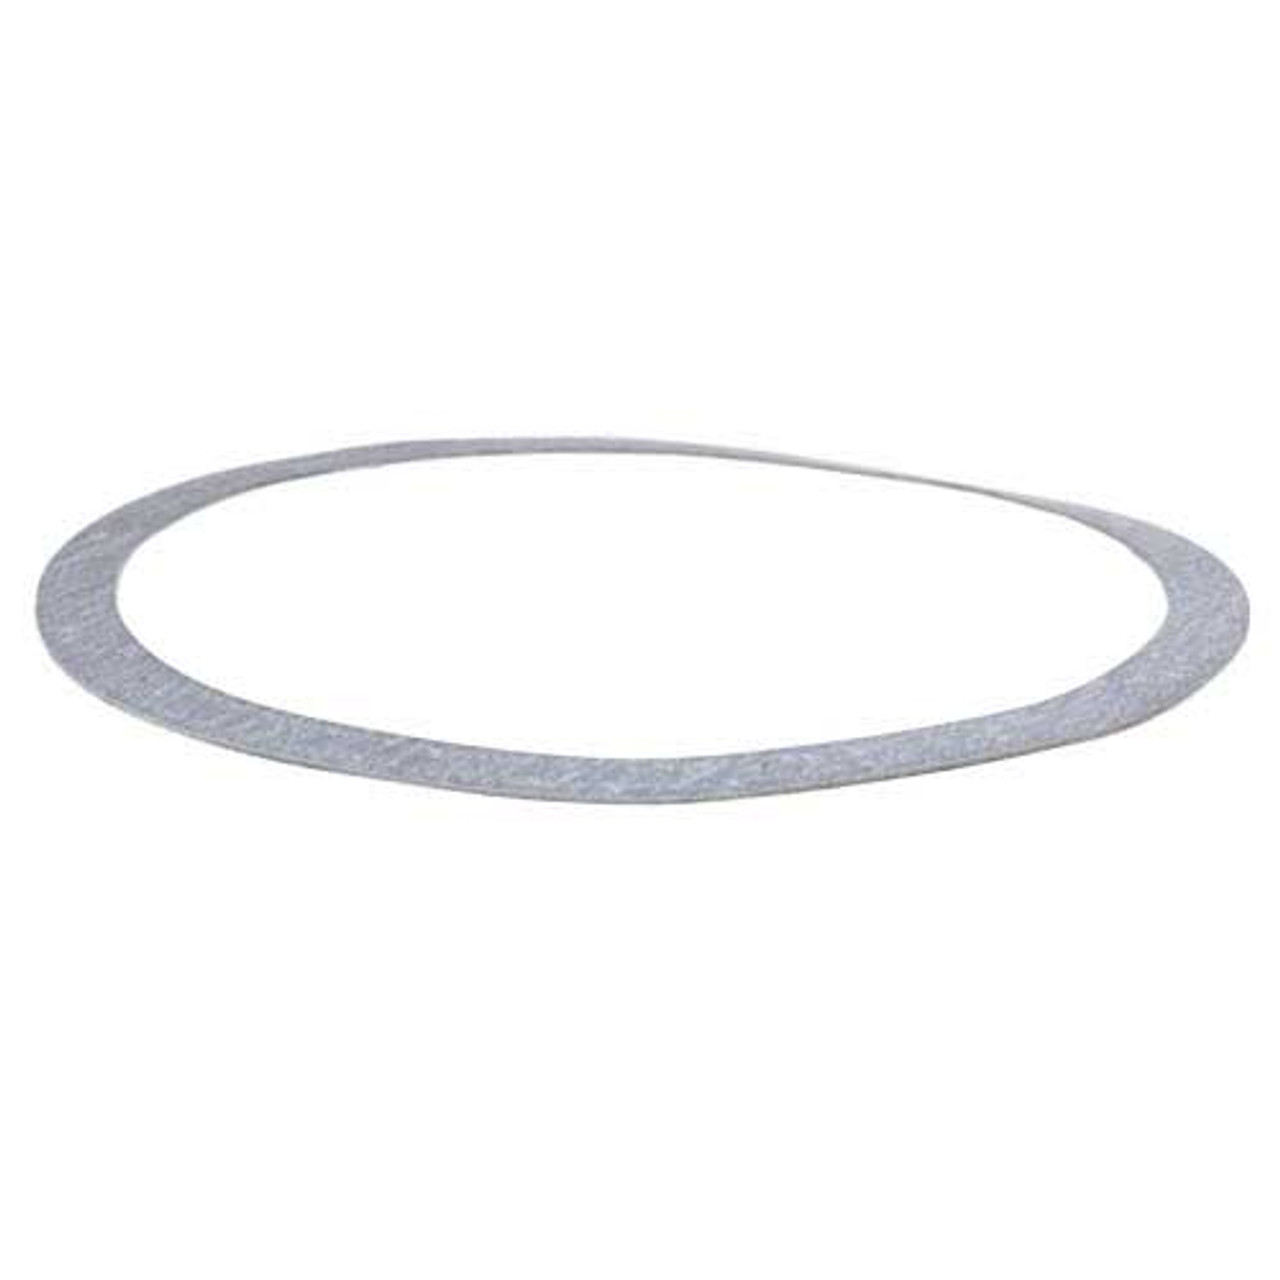 959A0061H03 - End Cover Gasket